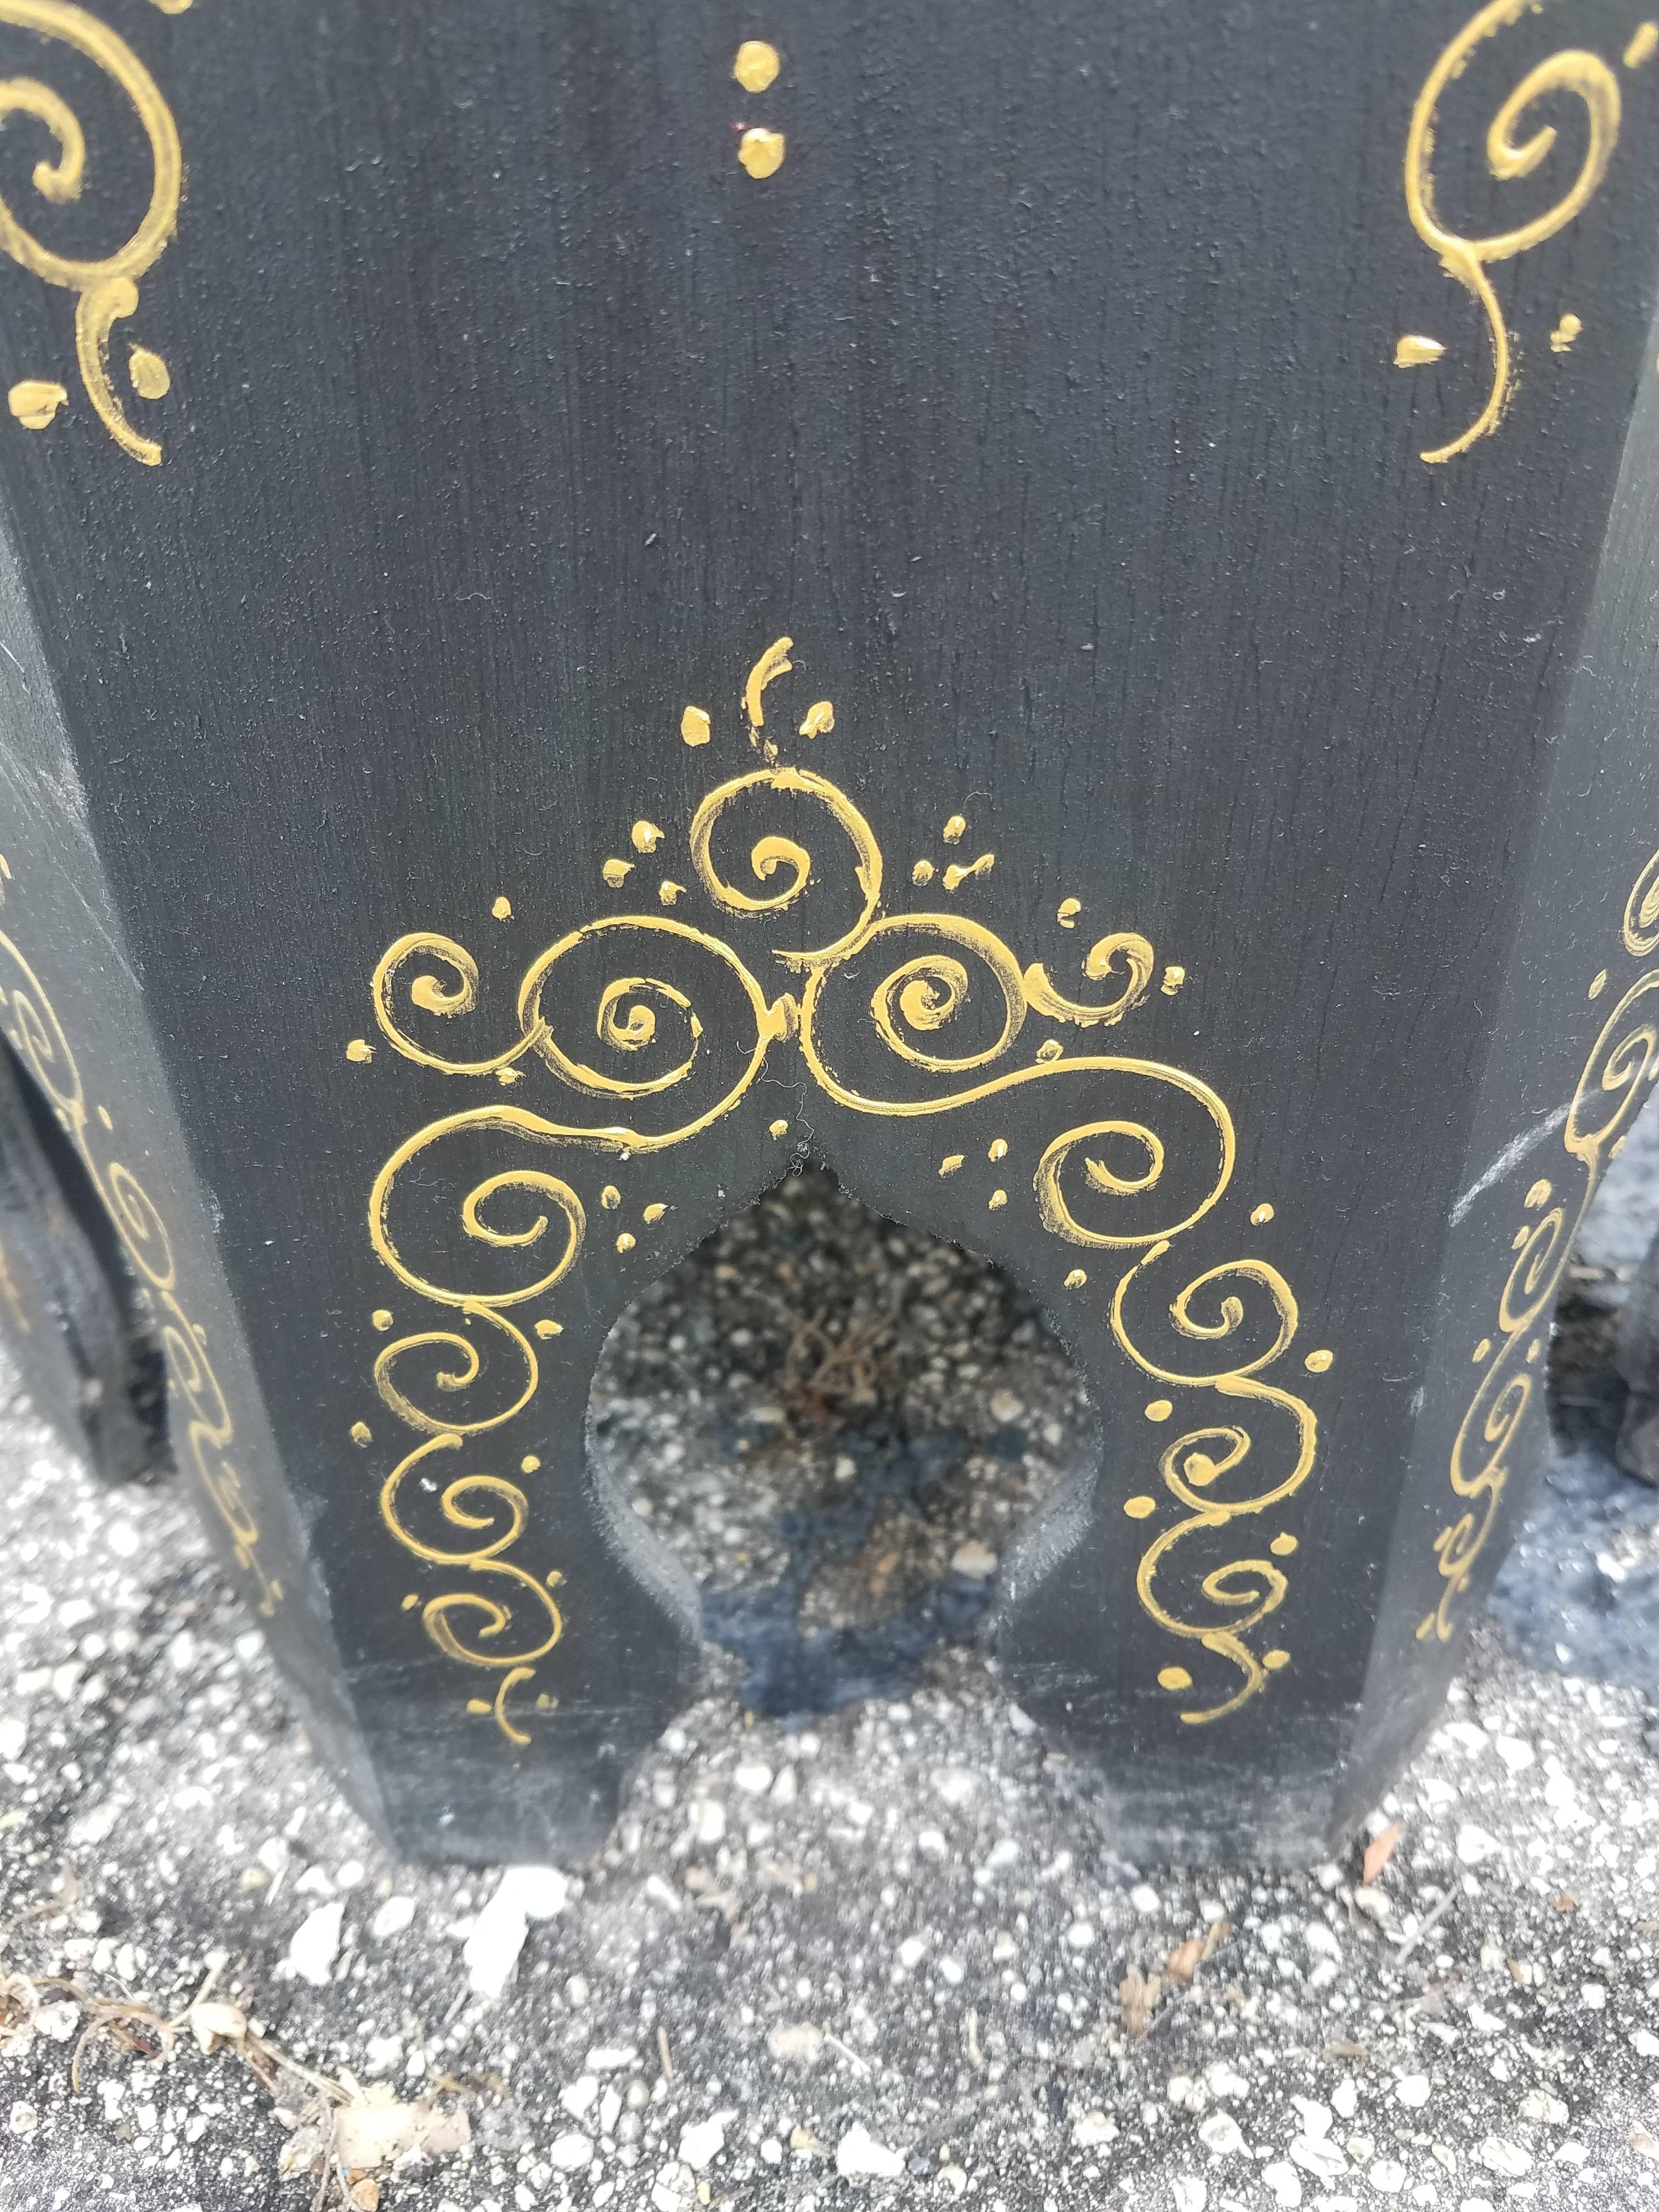 Large Hexagonal Moroccan Hand-Painted Side Table, Black In Excellent Condition For Sale In Orlando, FL